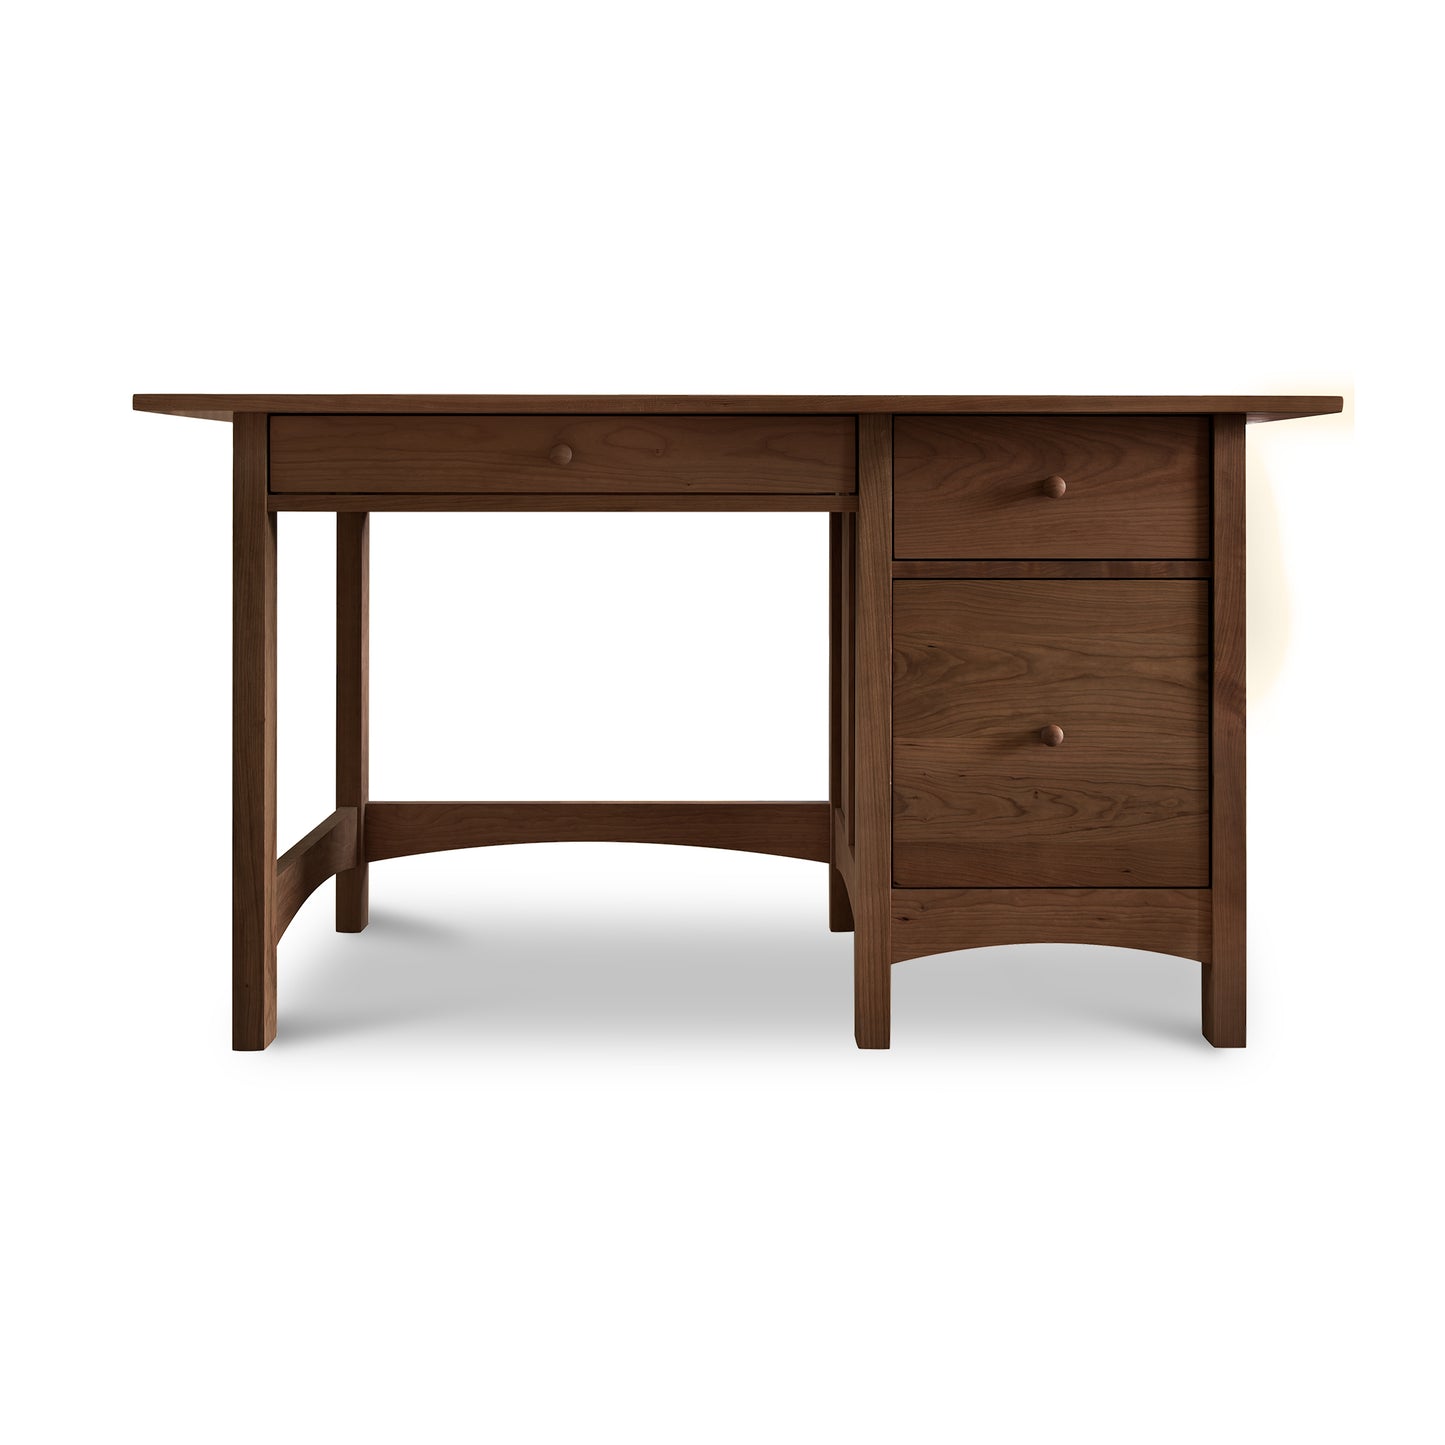 A handcrafted Vermont Furniture Designs Burlington Shaker Study Desk with two drawers on the right side, isolated on a white background.